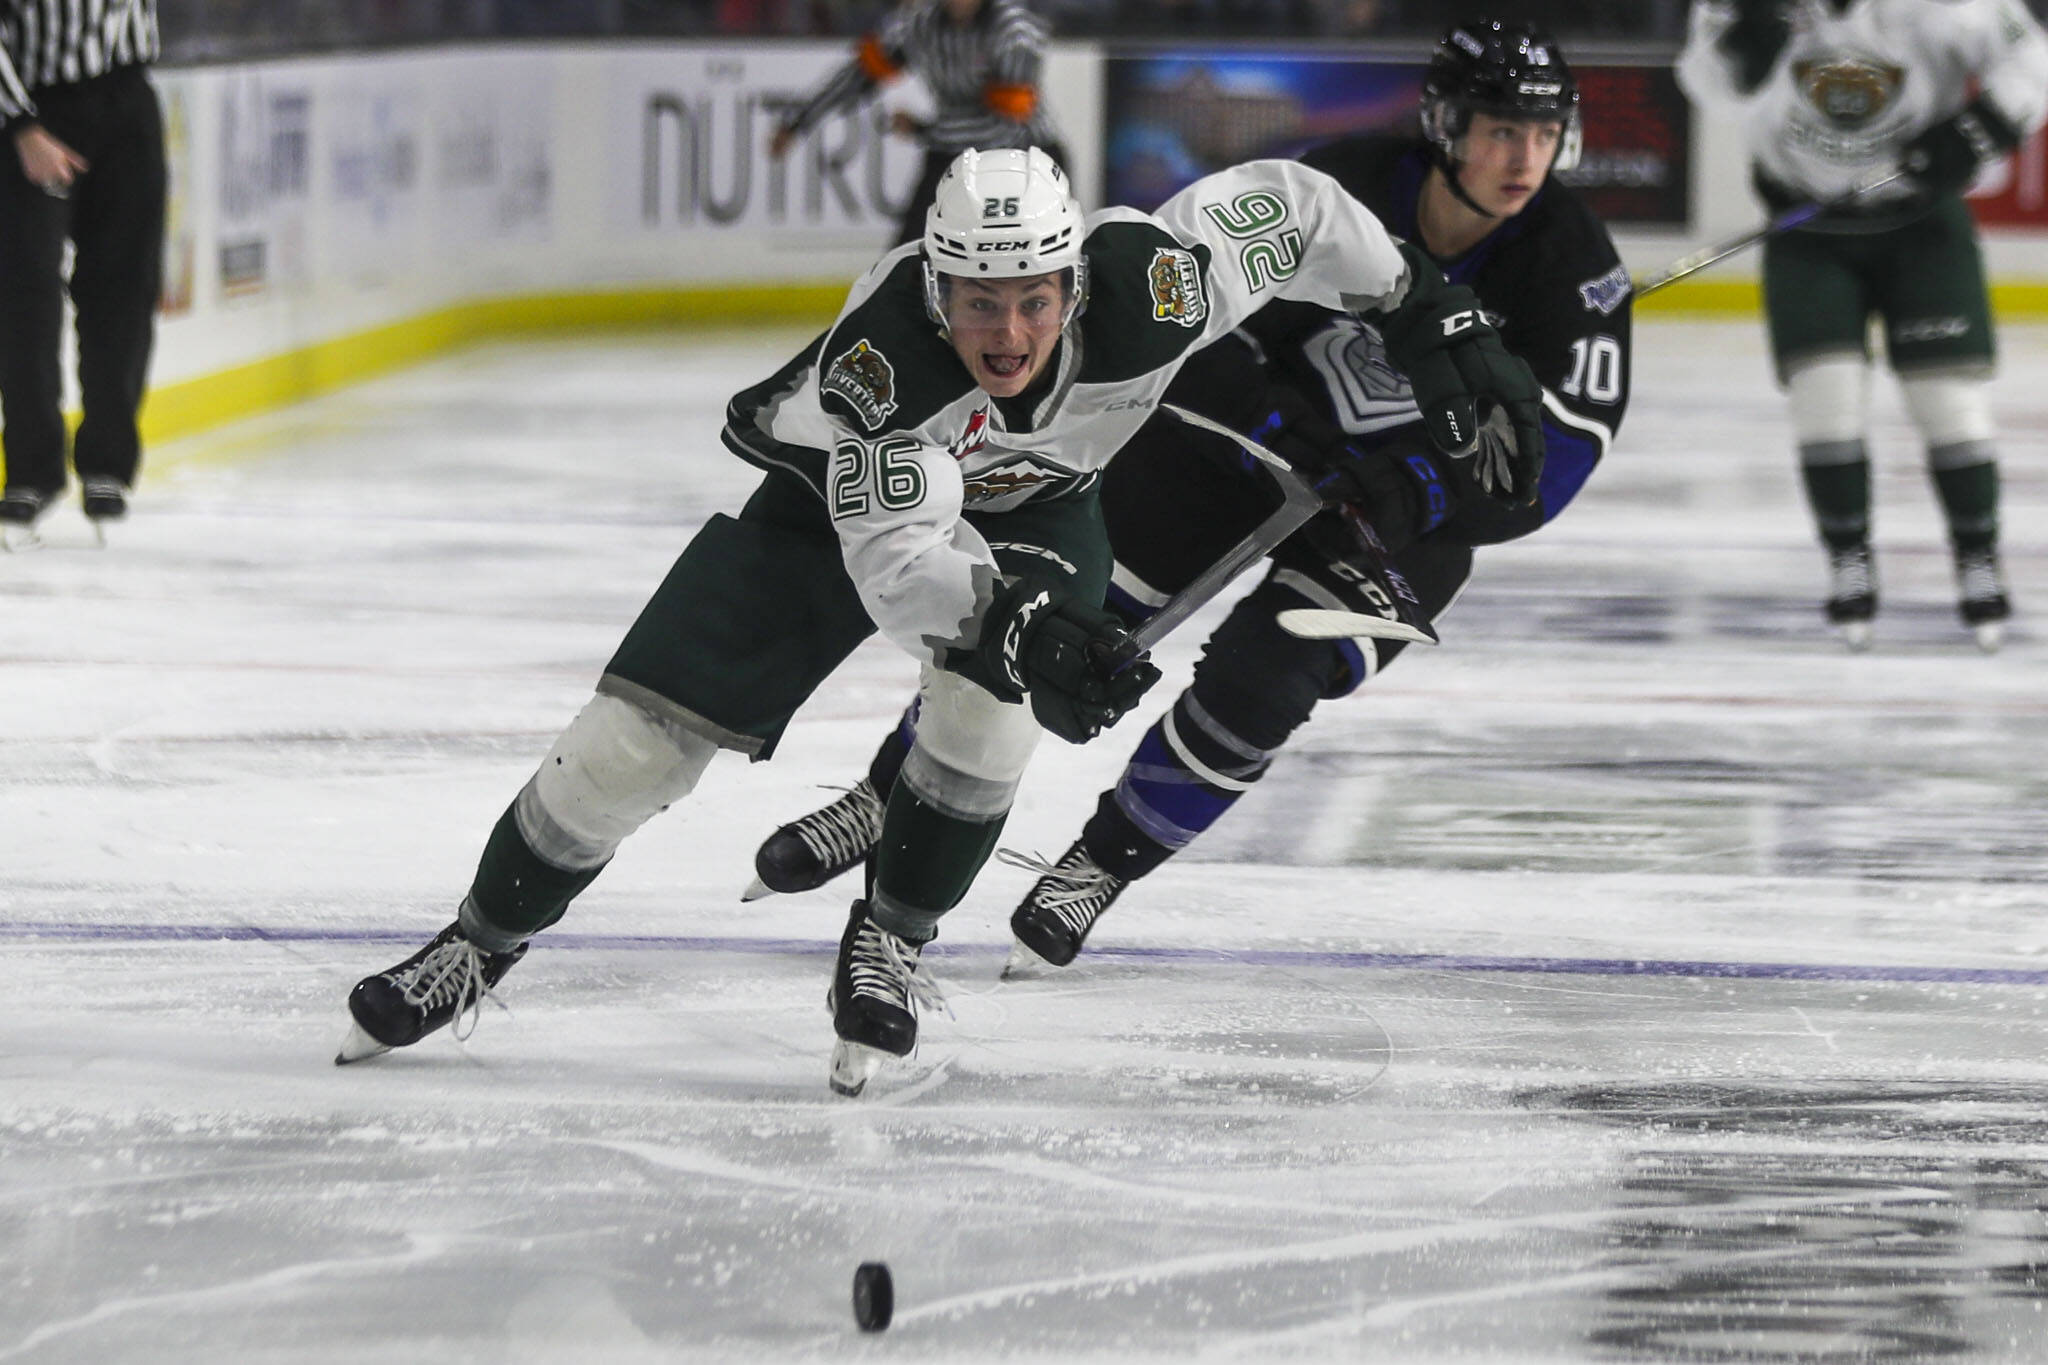 Silvertips’ Andrew Petruk (26) fights for the puck during a game between the Everett Silvertips and Victoria Royals at the Angel of the Winds Arena on Saturday, Sept. 23, 2023. The Silvertips won, 5-3. (Annie Barker / The Herald)